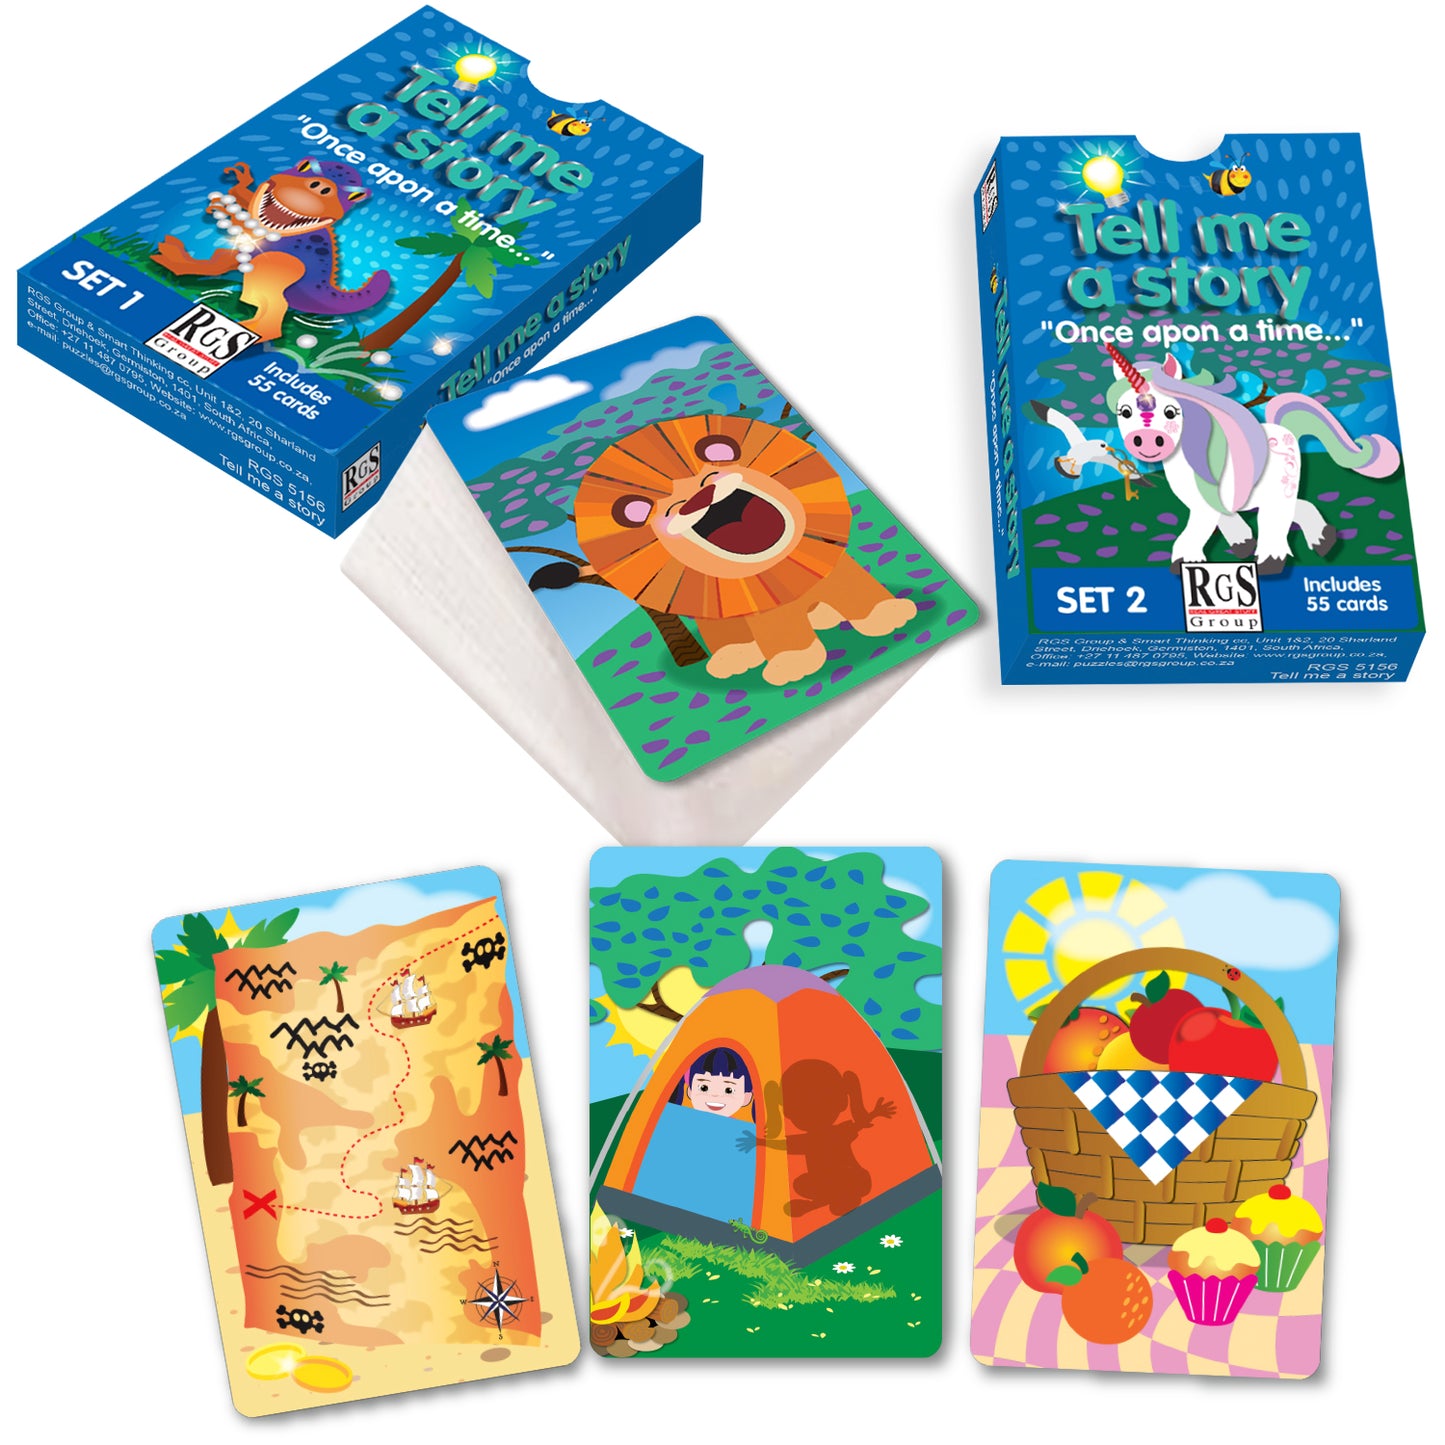 Tell Me A Story Card Game